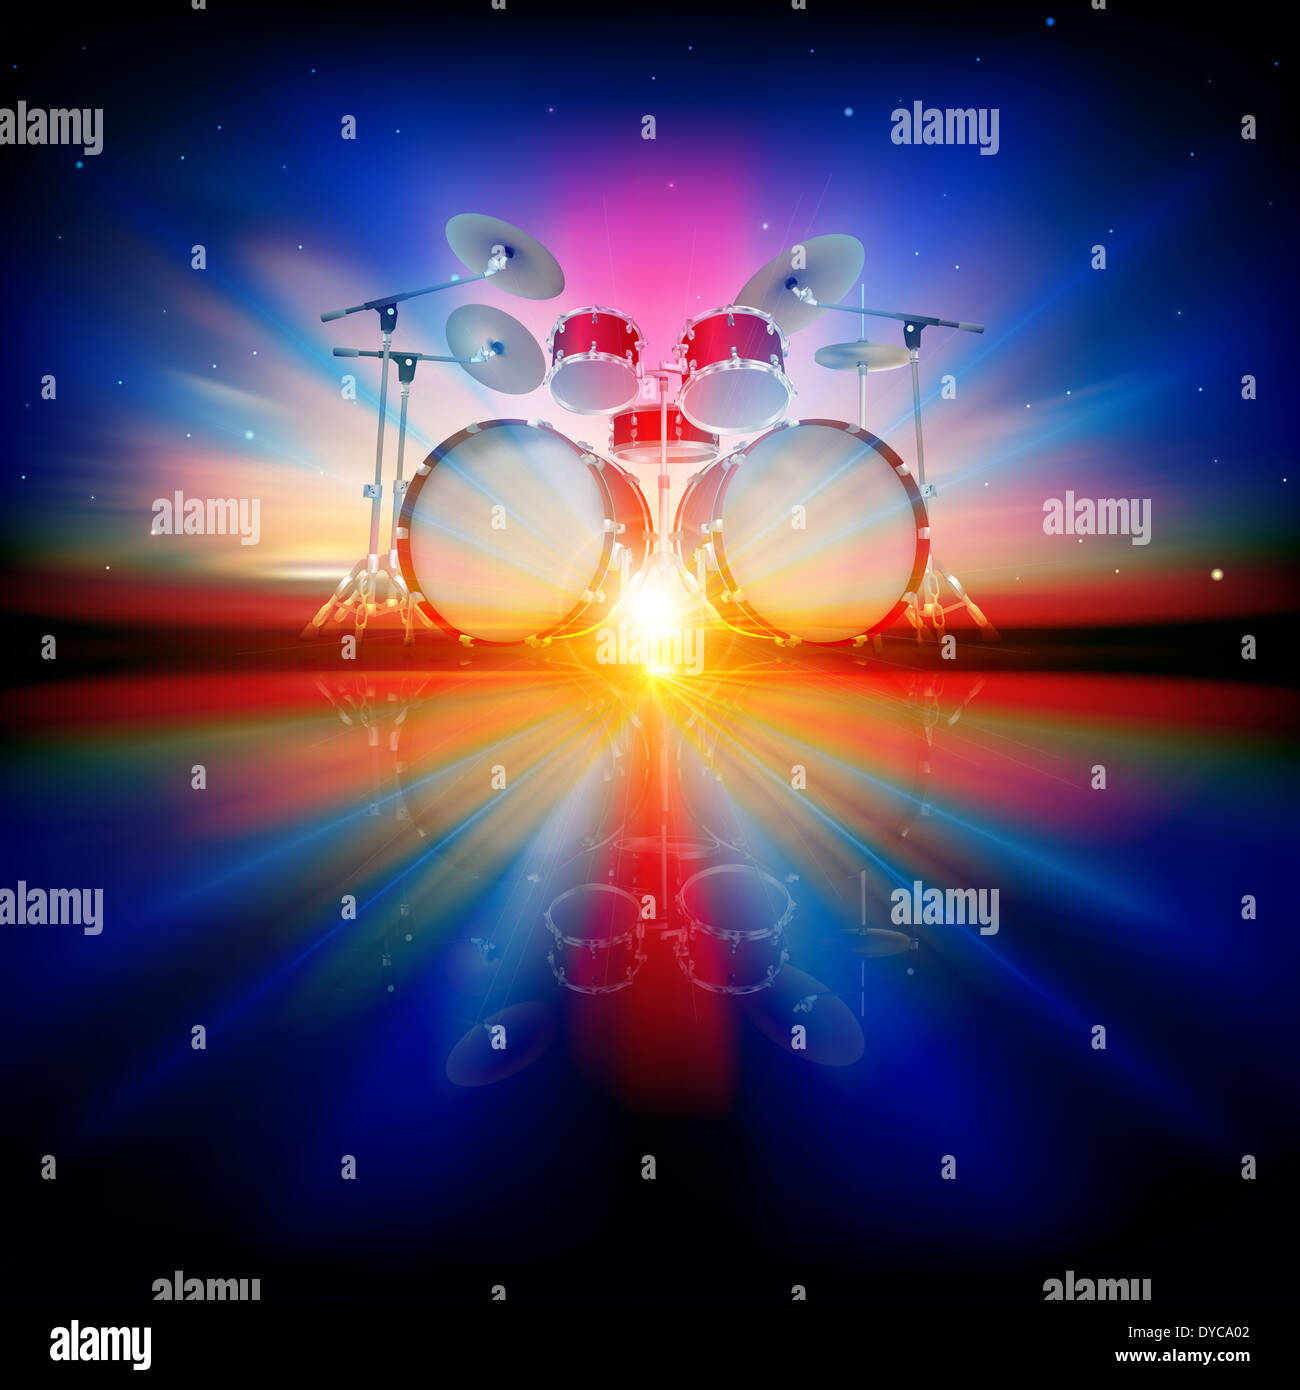 abstract music background with drum kit and night sky Stock Photo